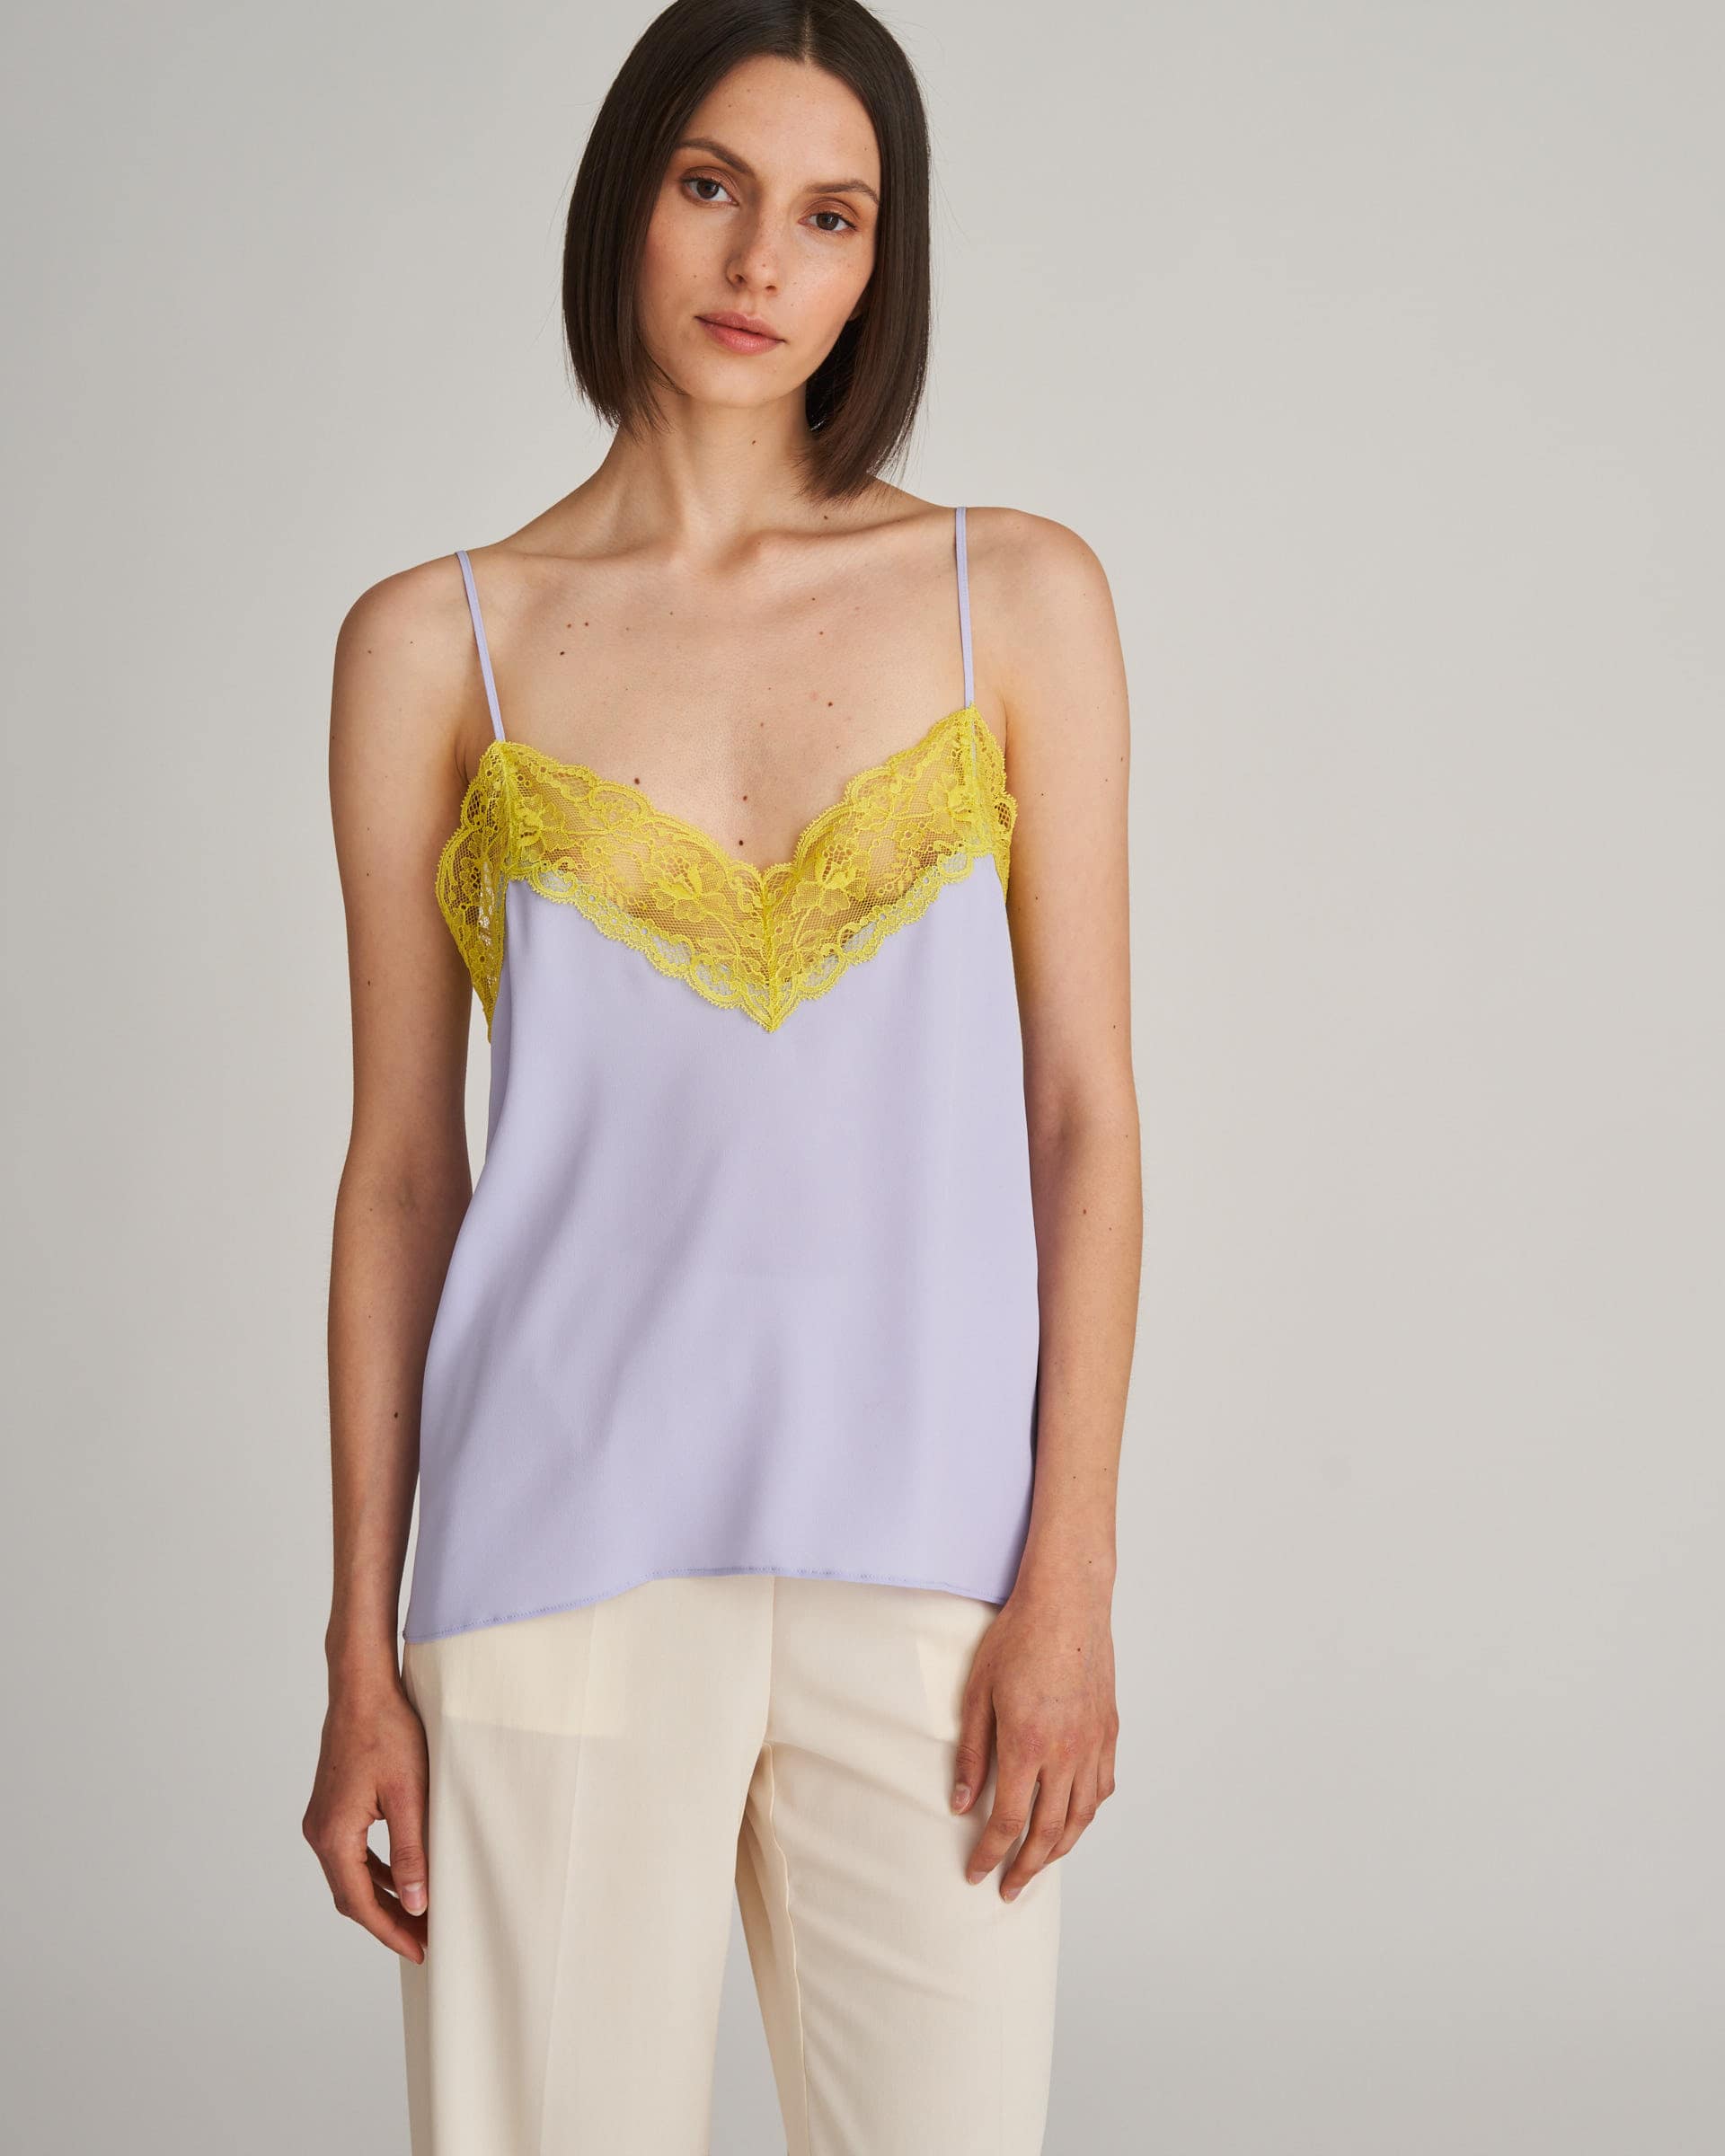 The Market Store | Contrasting Lace Top